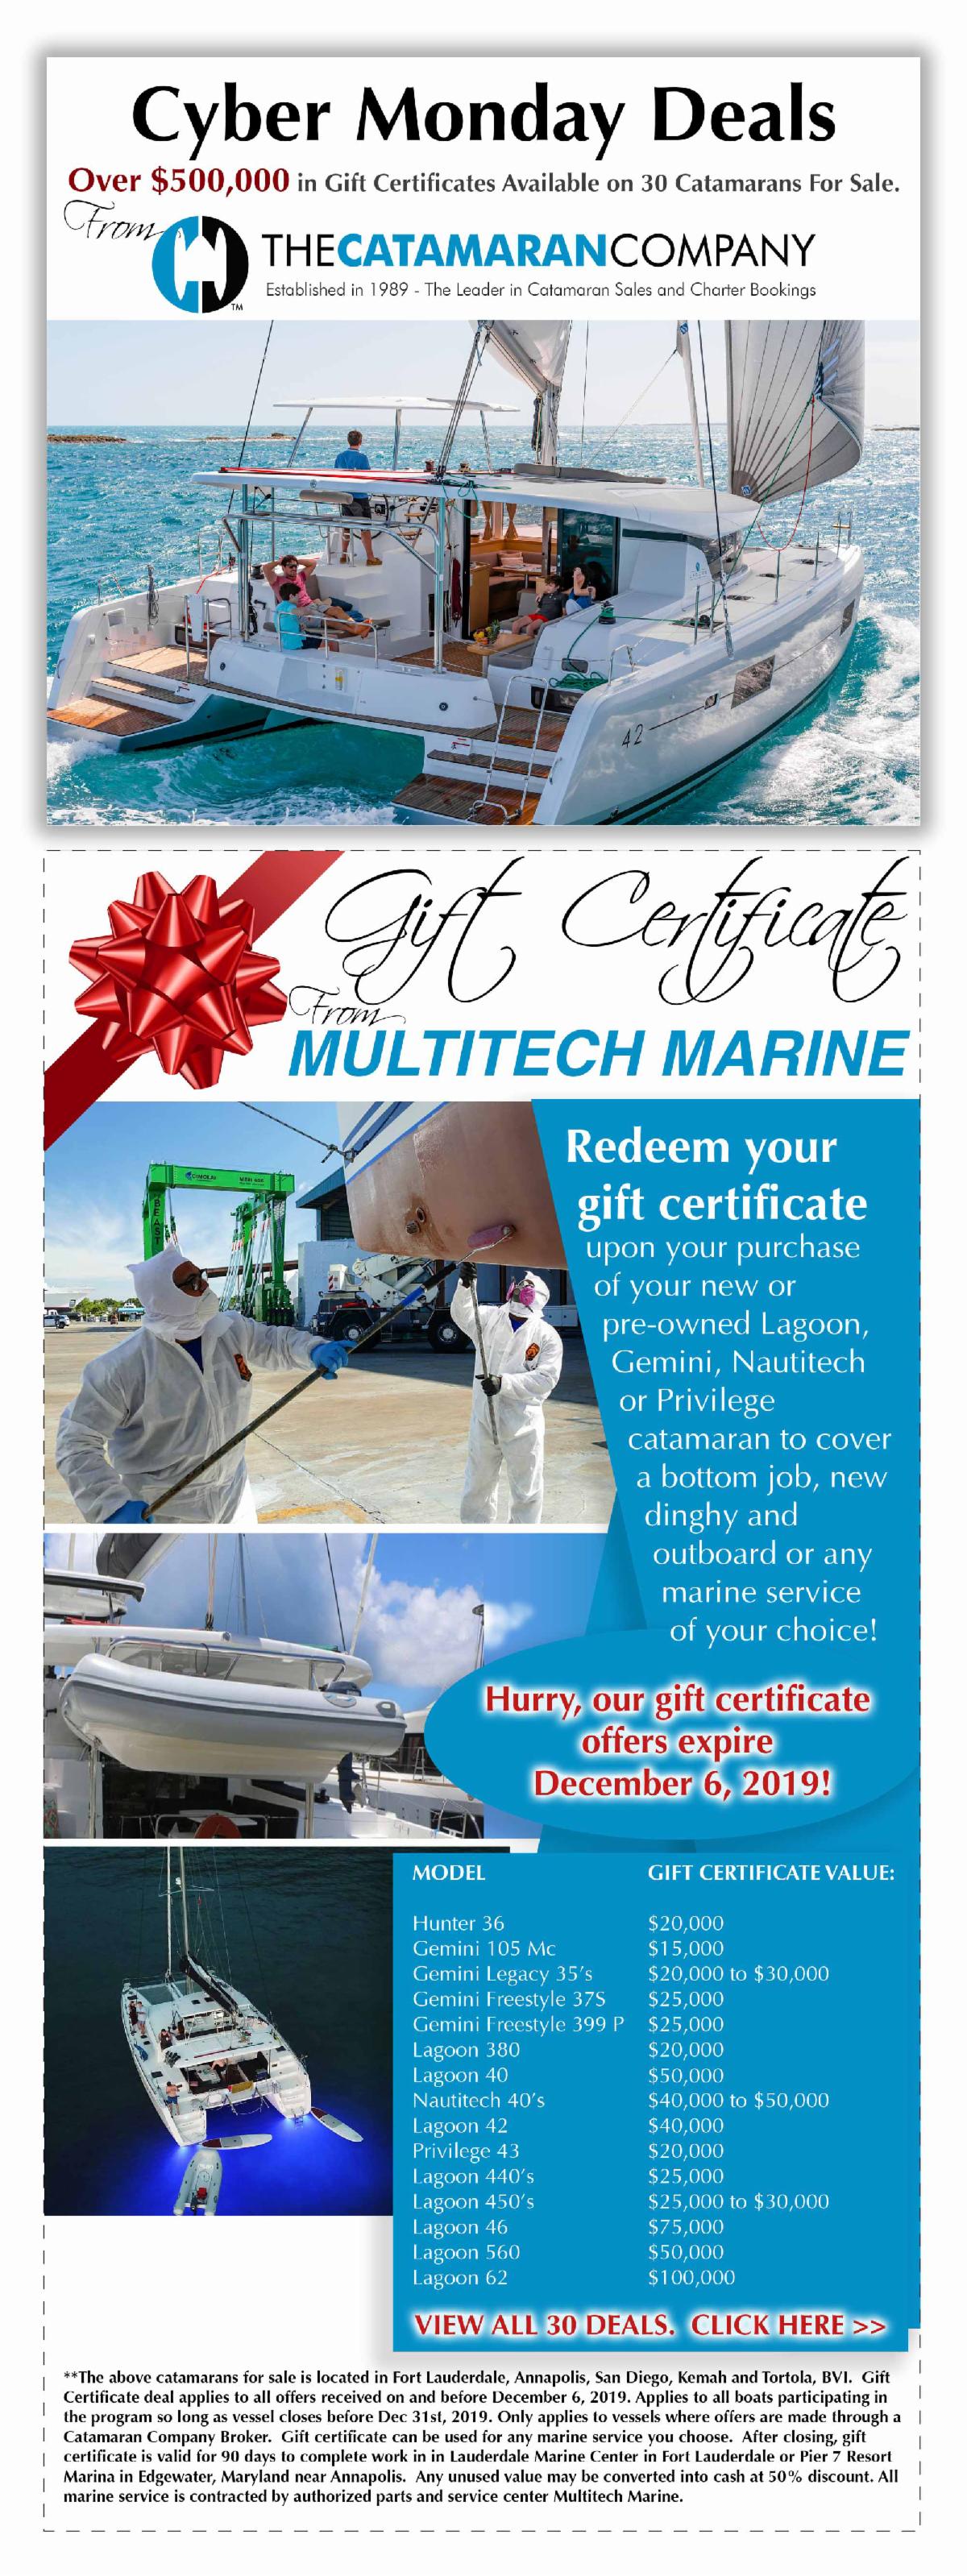 Over $500,000 in Gift Certificates on 30 Catamarans For Sal